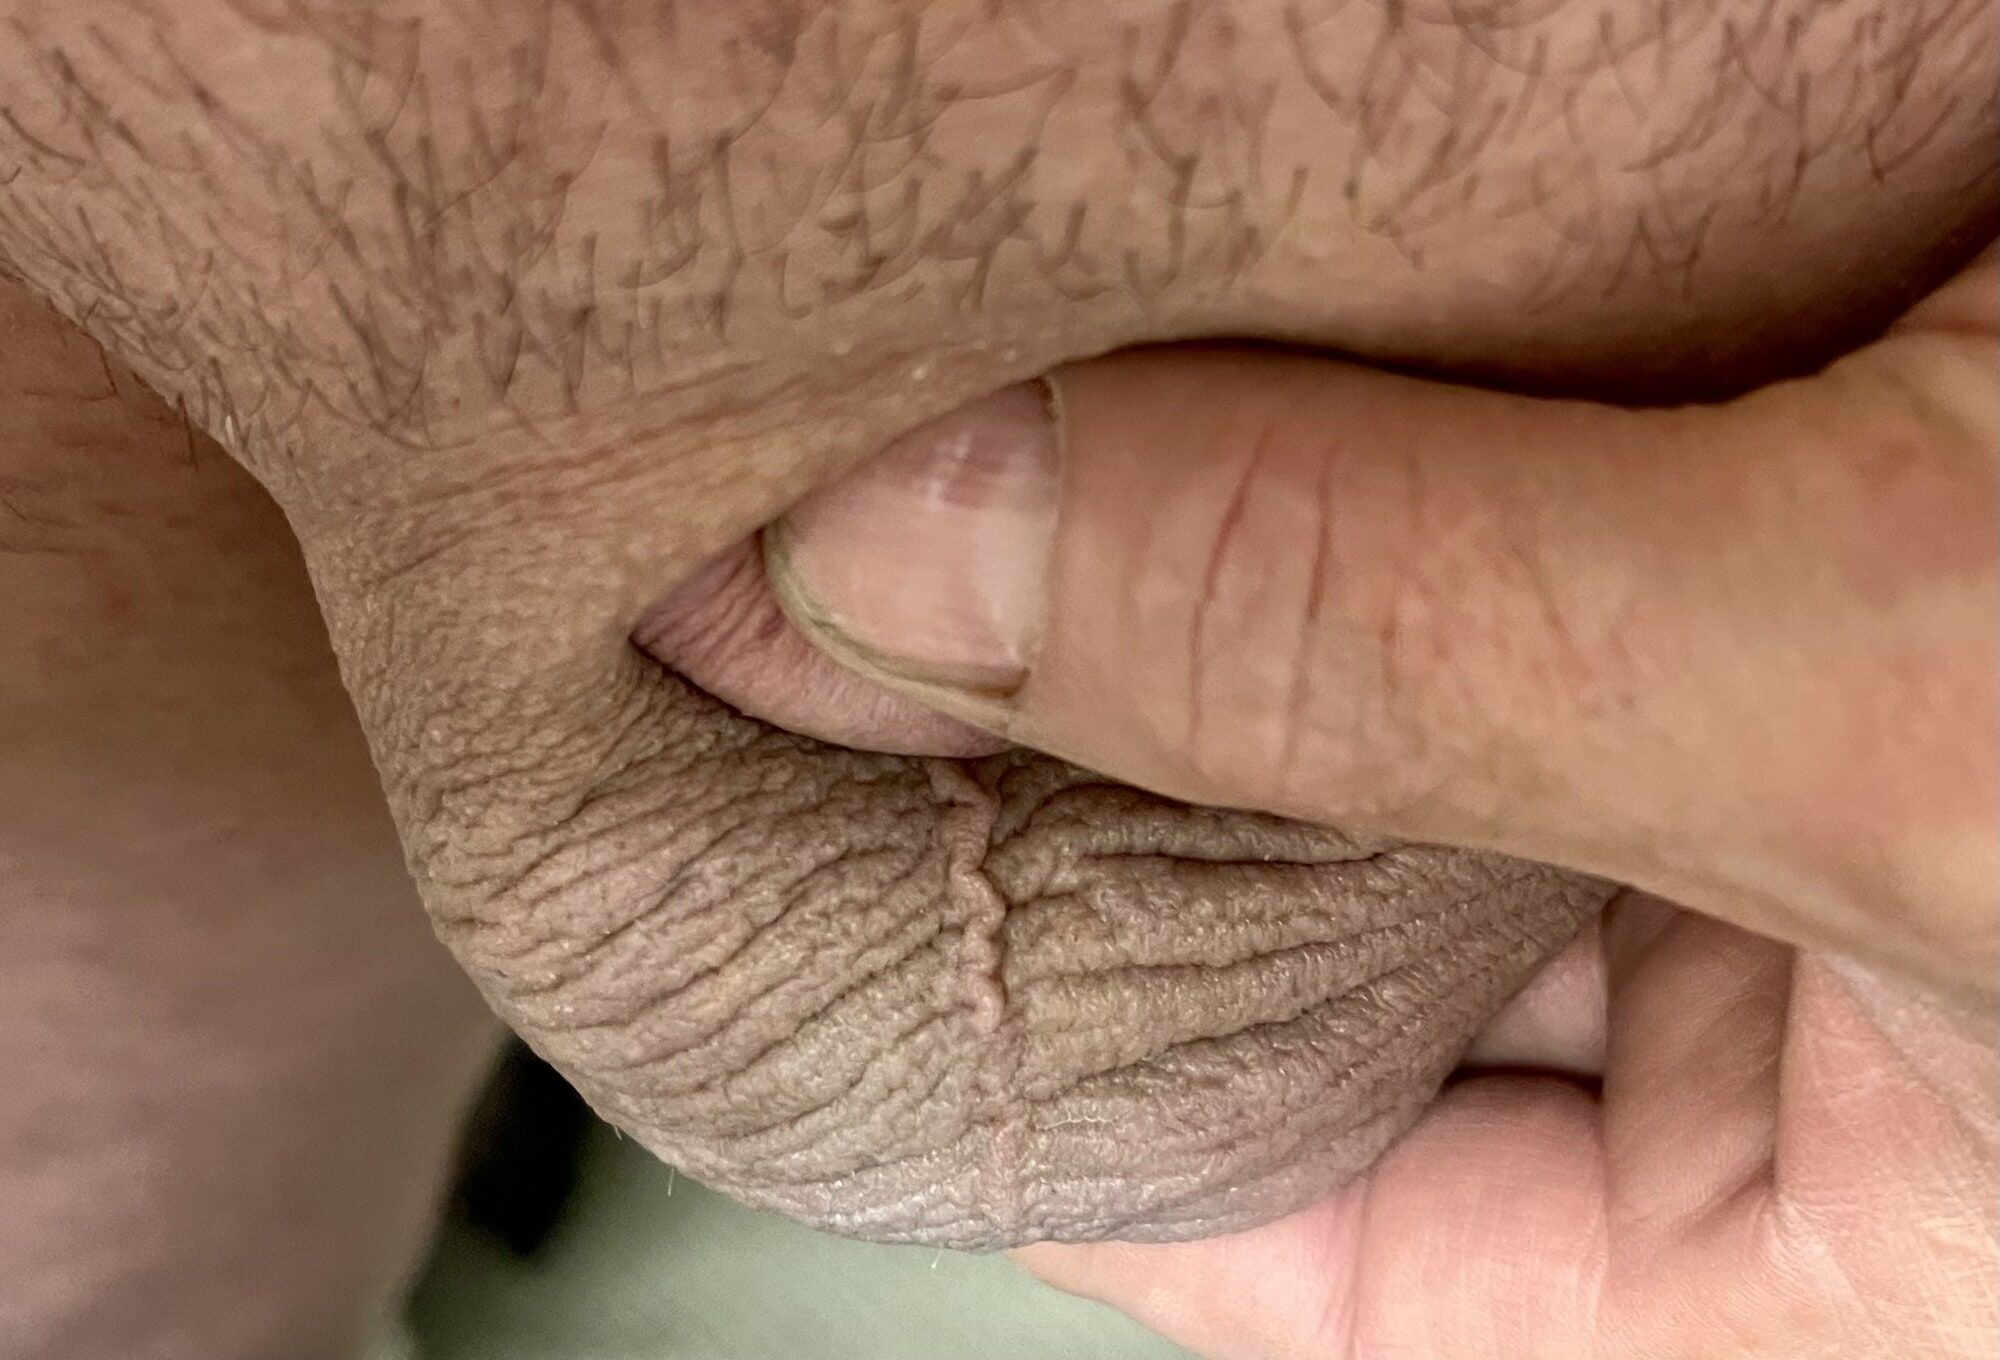 Me and my inverted cock